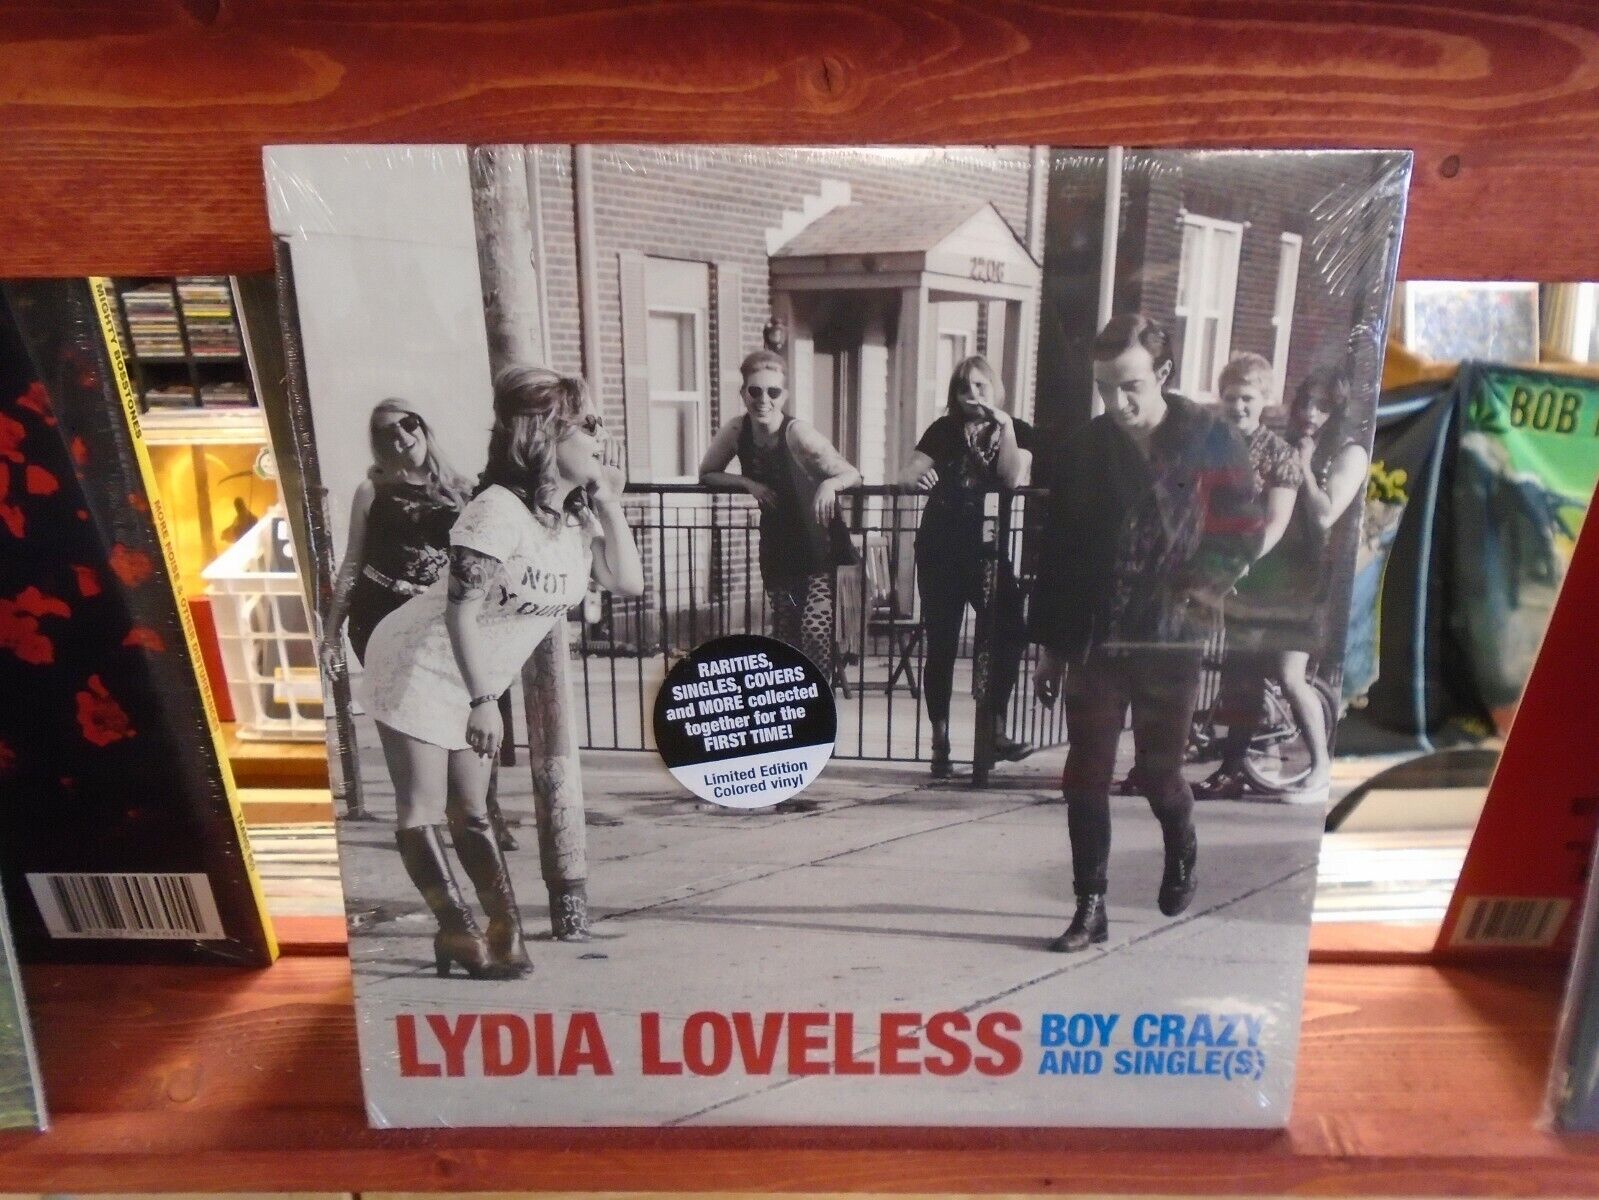 Lydia Loveless Boy Crazy and Single (s) LP NEW YELLOW Colored 180g vinyl 